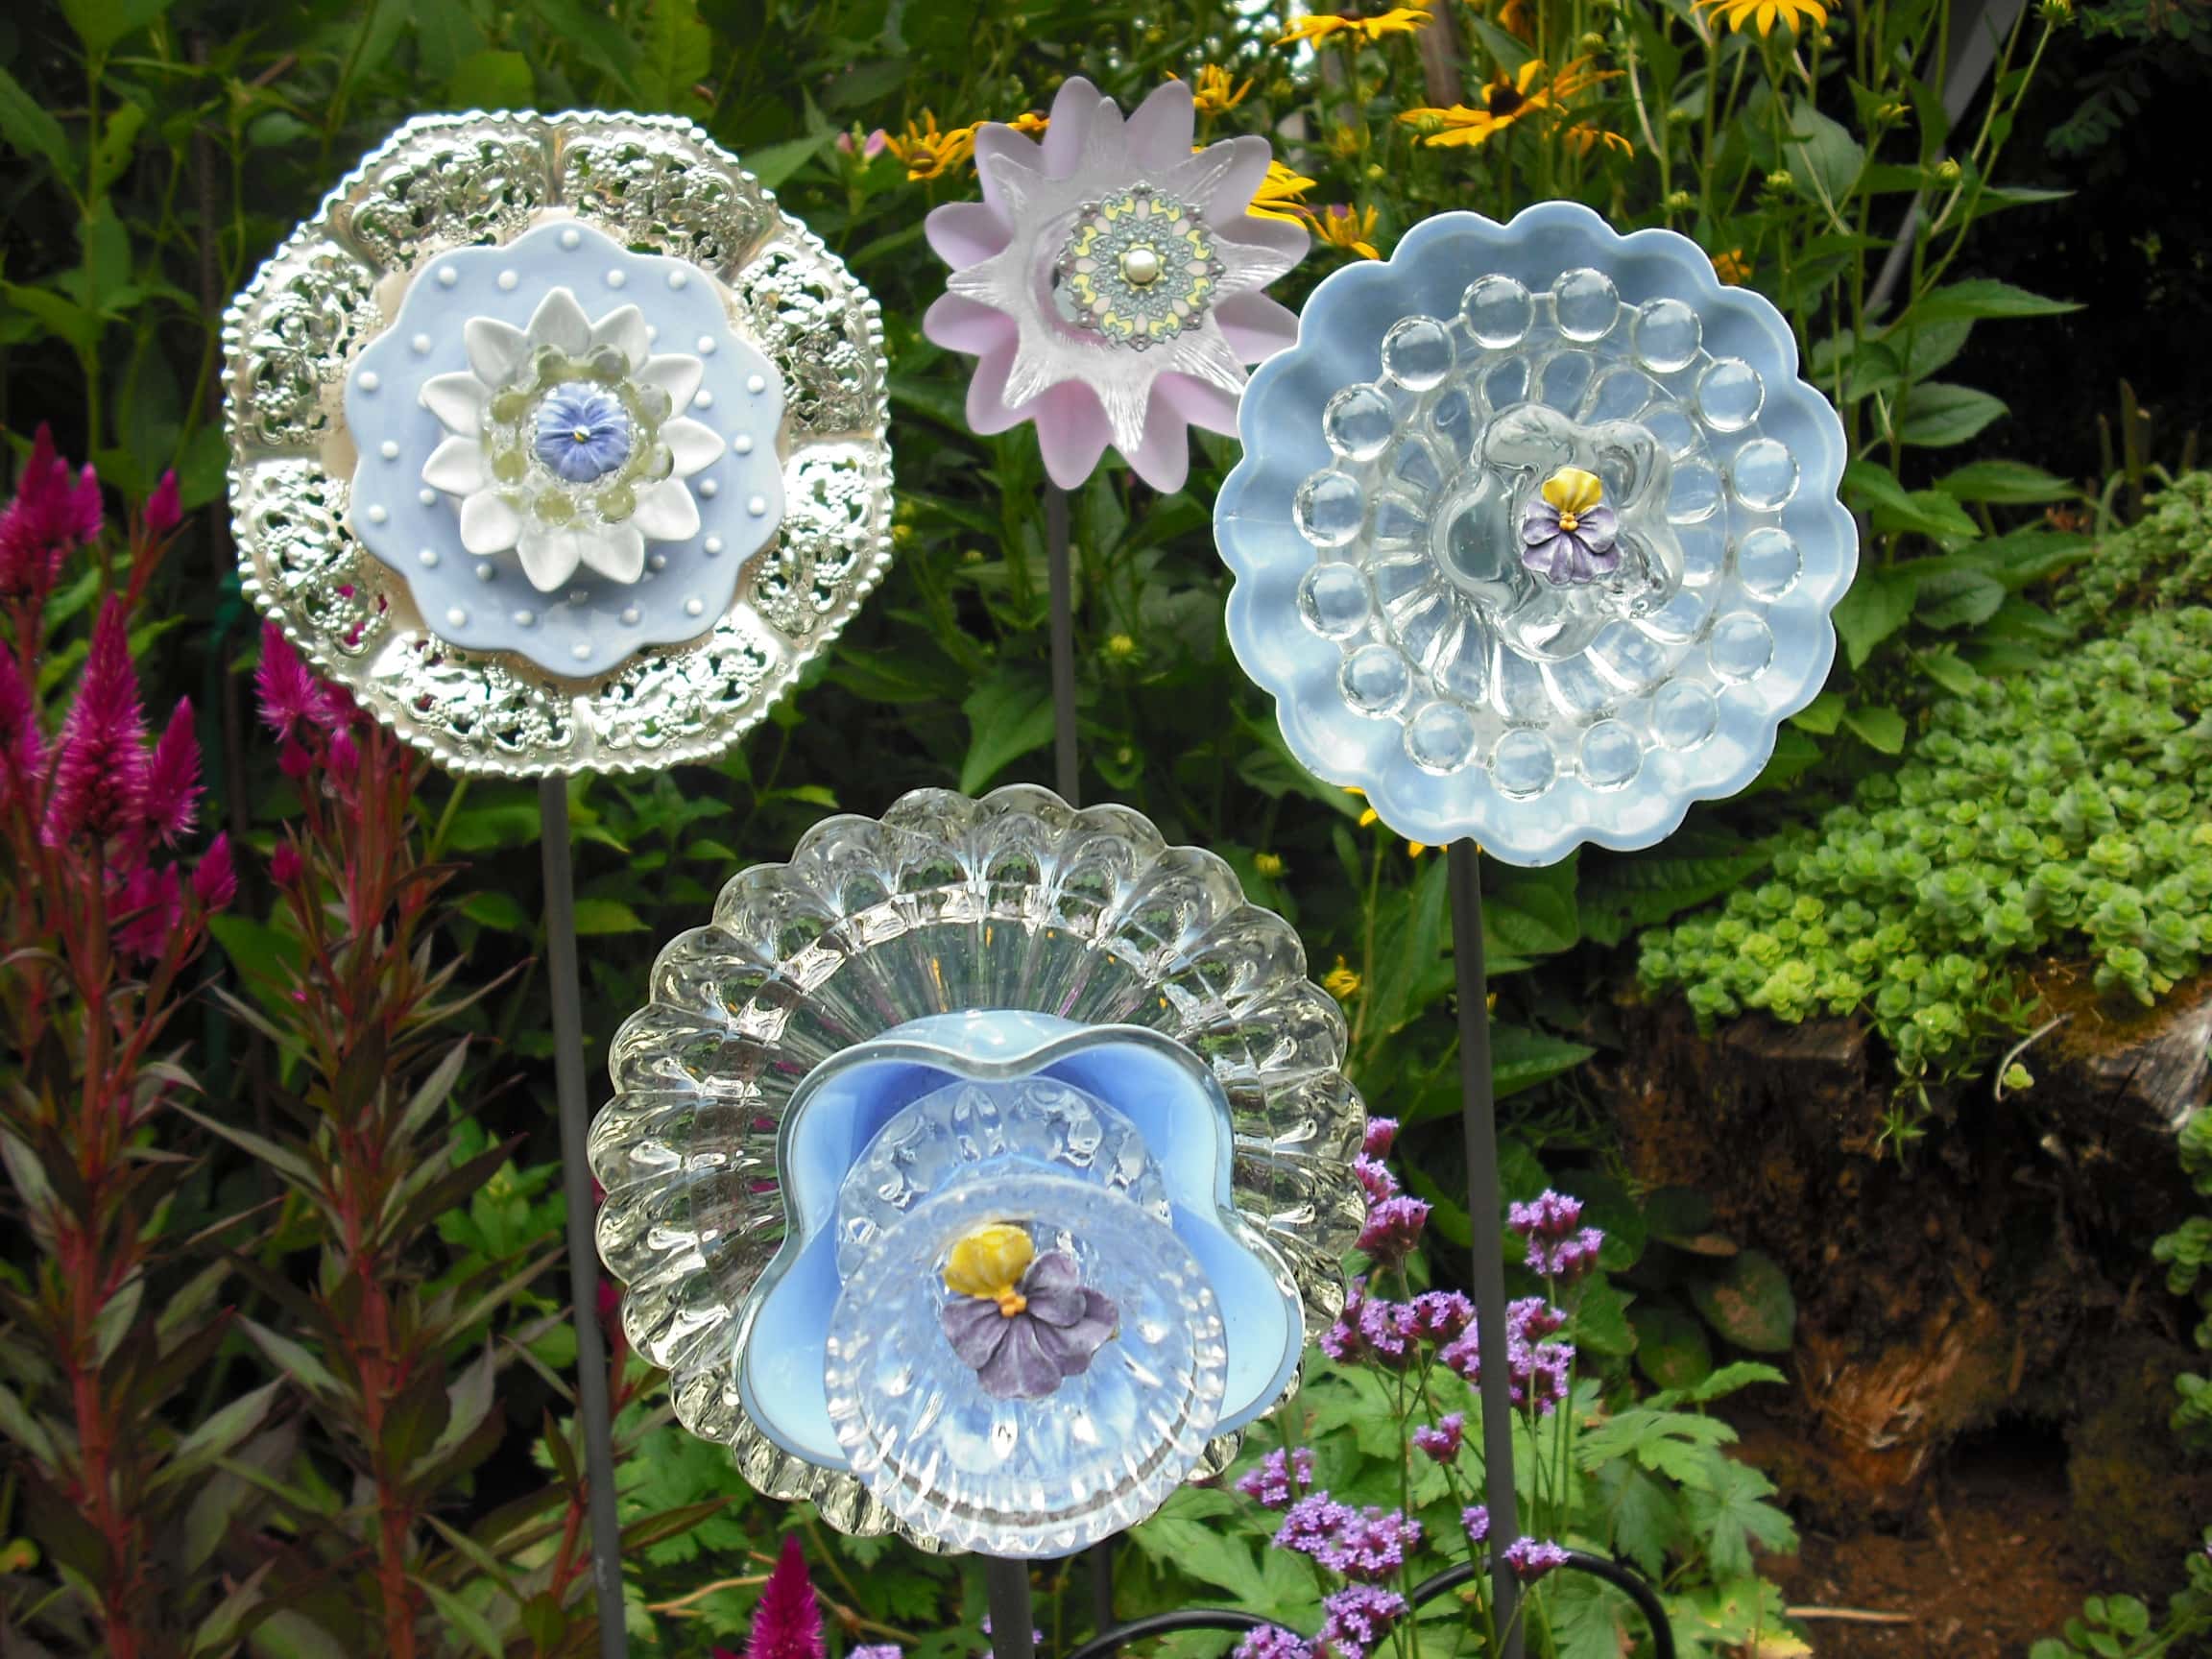 Using Recycled Glass To Make Flowers - DIY Glass Flowers 